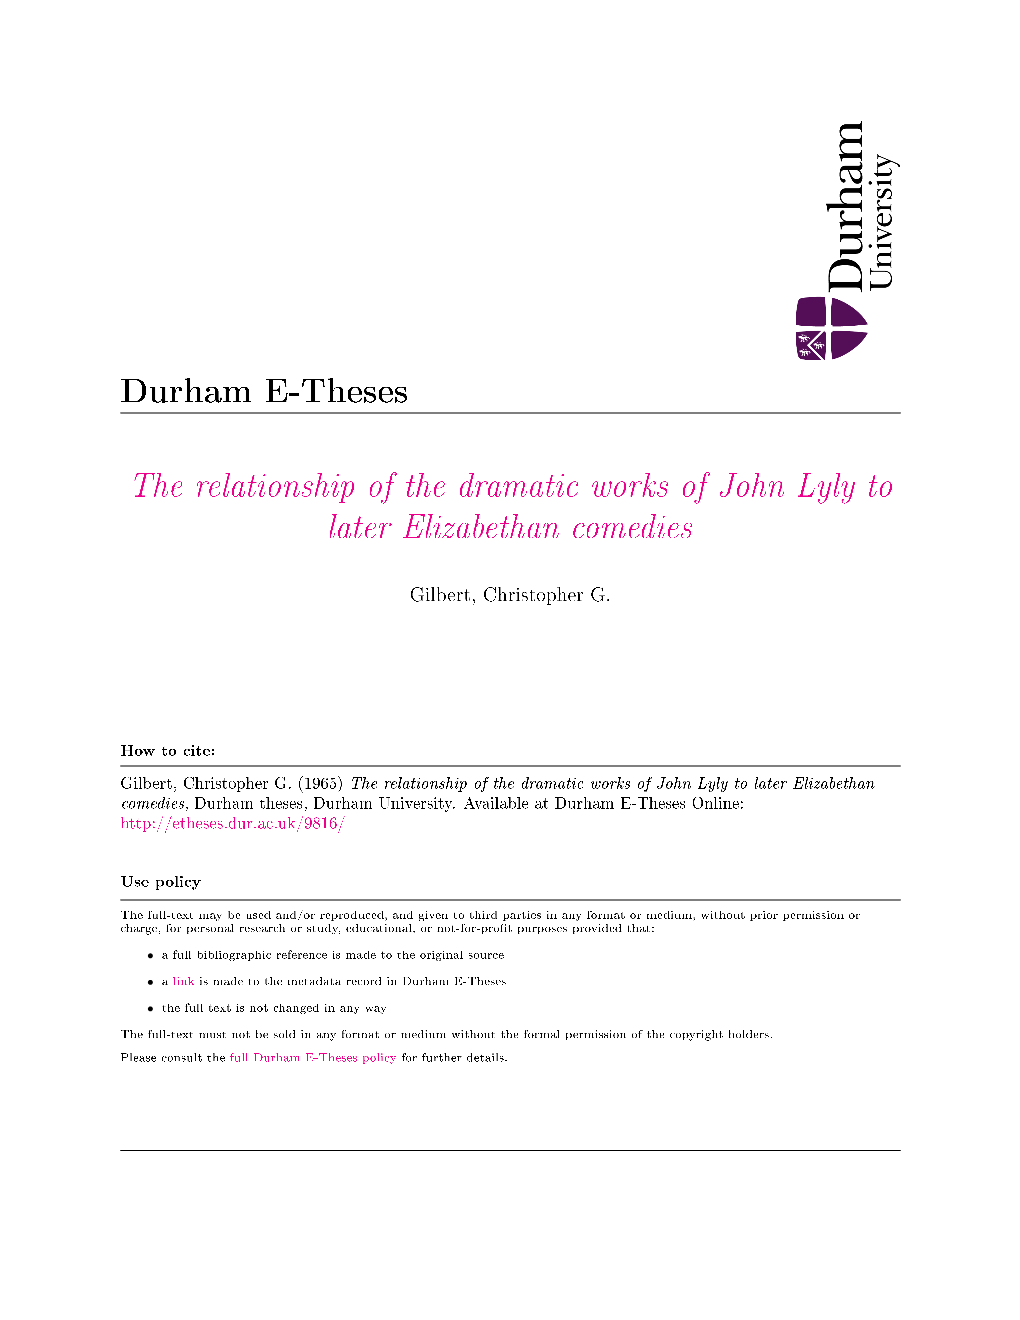 The Relationship of the Dramatic Works of John Lyly to Later Elizabethan Comedies